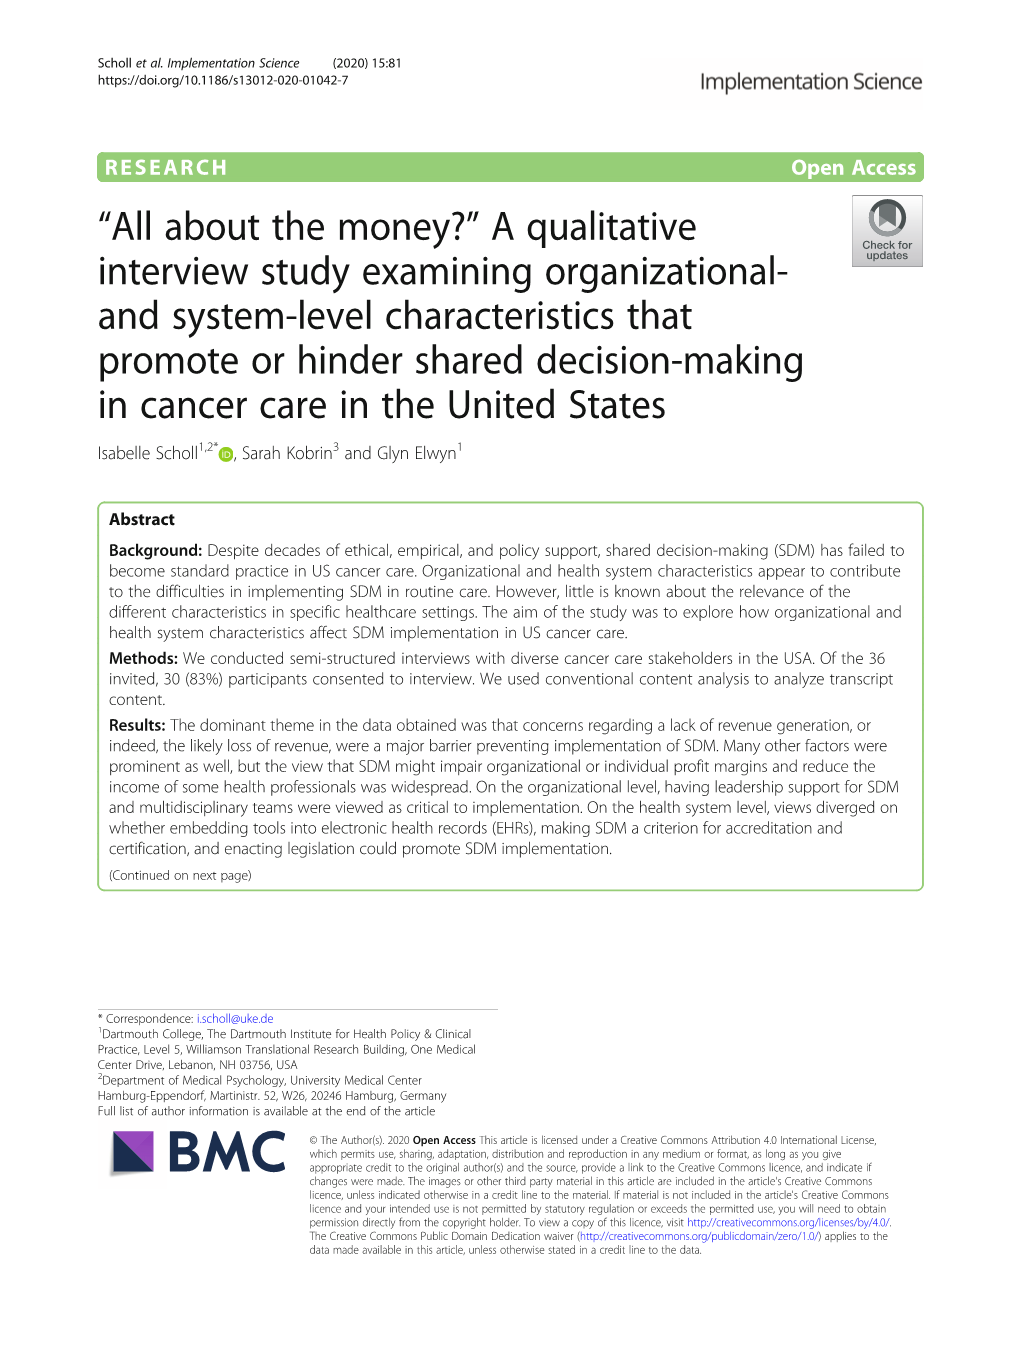 “All About the Money?” a Qualitative Interview Study Examining